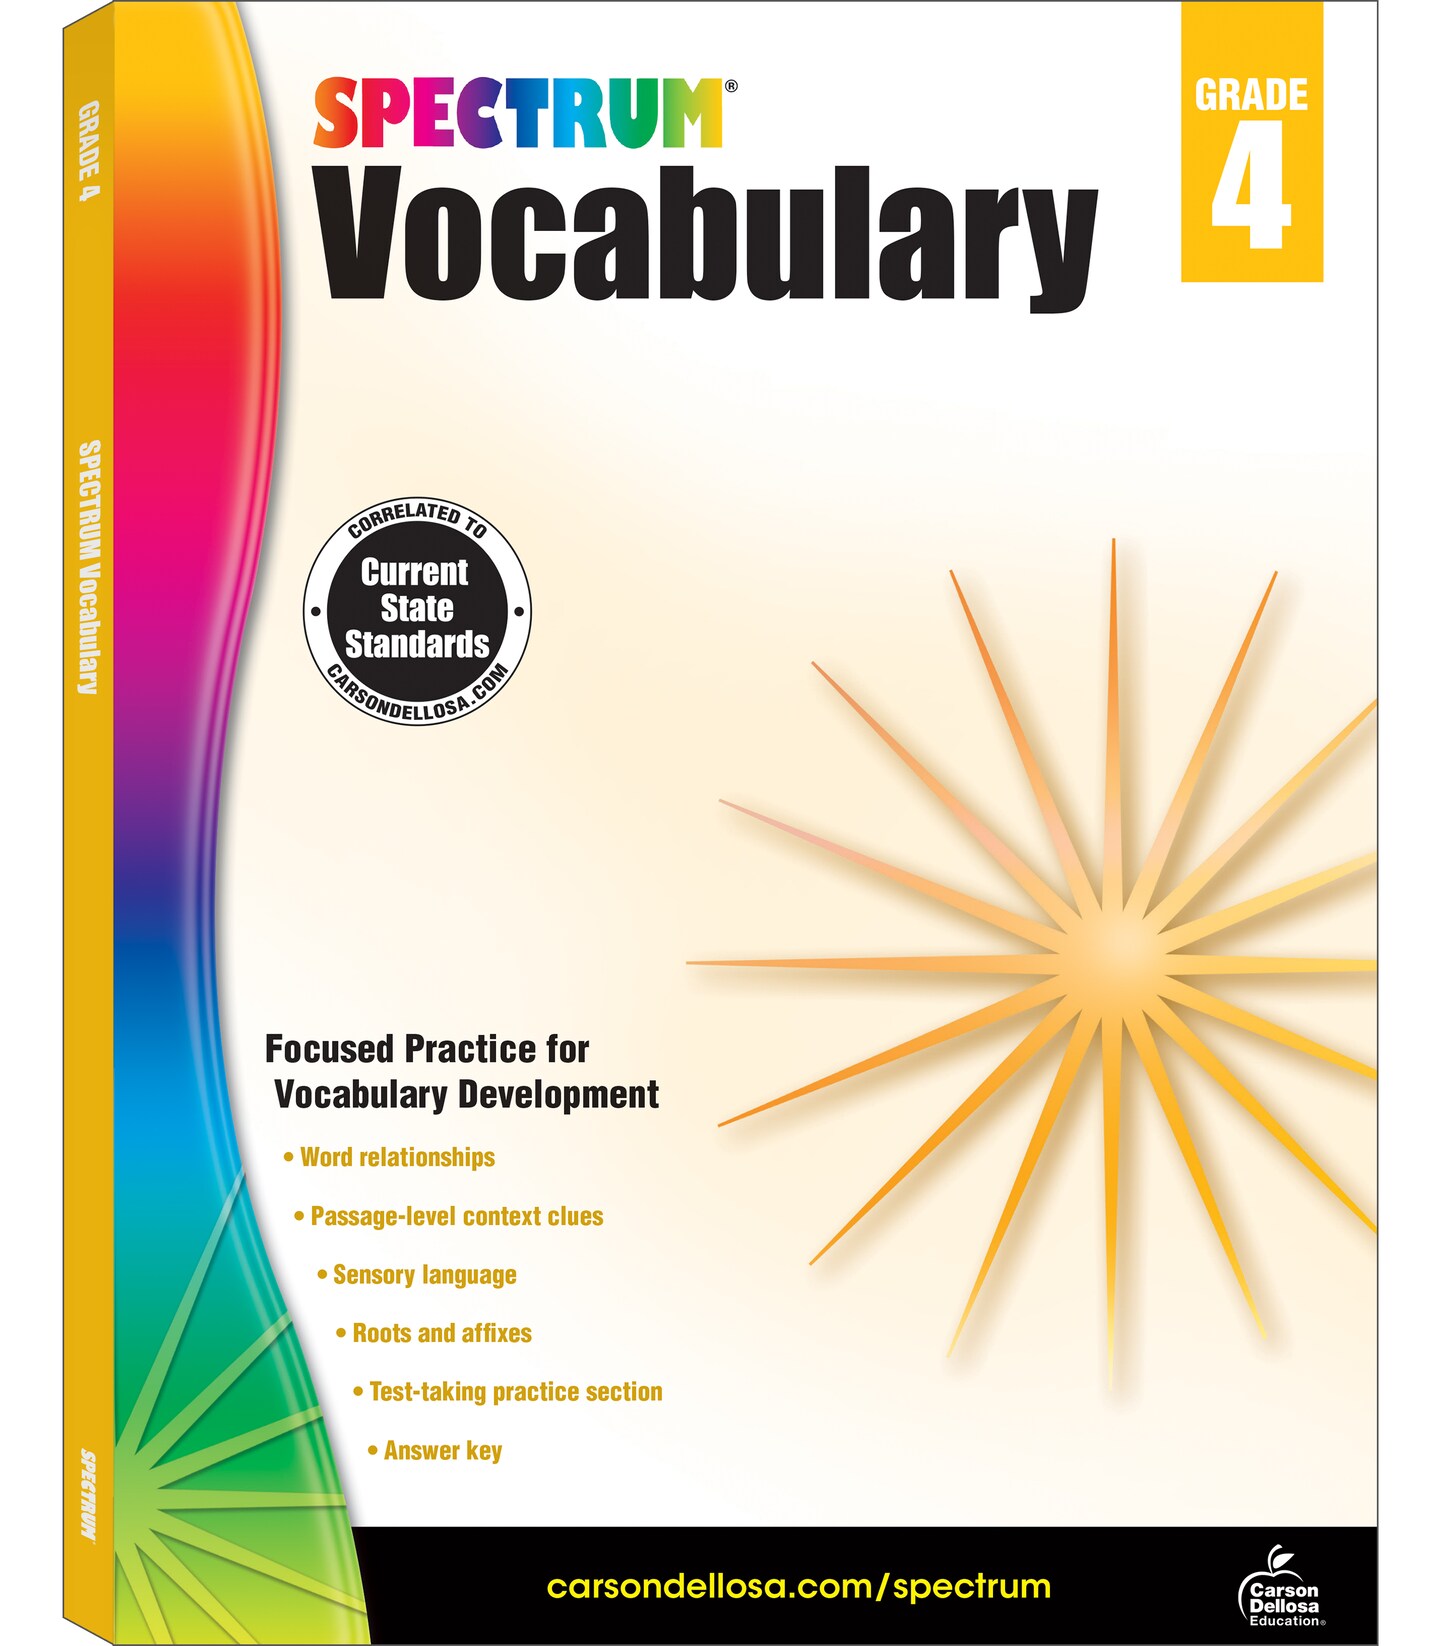 Spectrum Vocabulary Grade 4 Workbook, Ages 9 to 10, Grade 4 Vocabulary, Reading Comprehension Context Clues, Word Relationships, Sensory Language, Roots and Affixes - 160 Pages